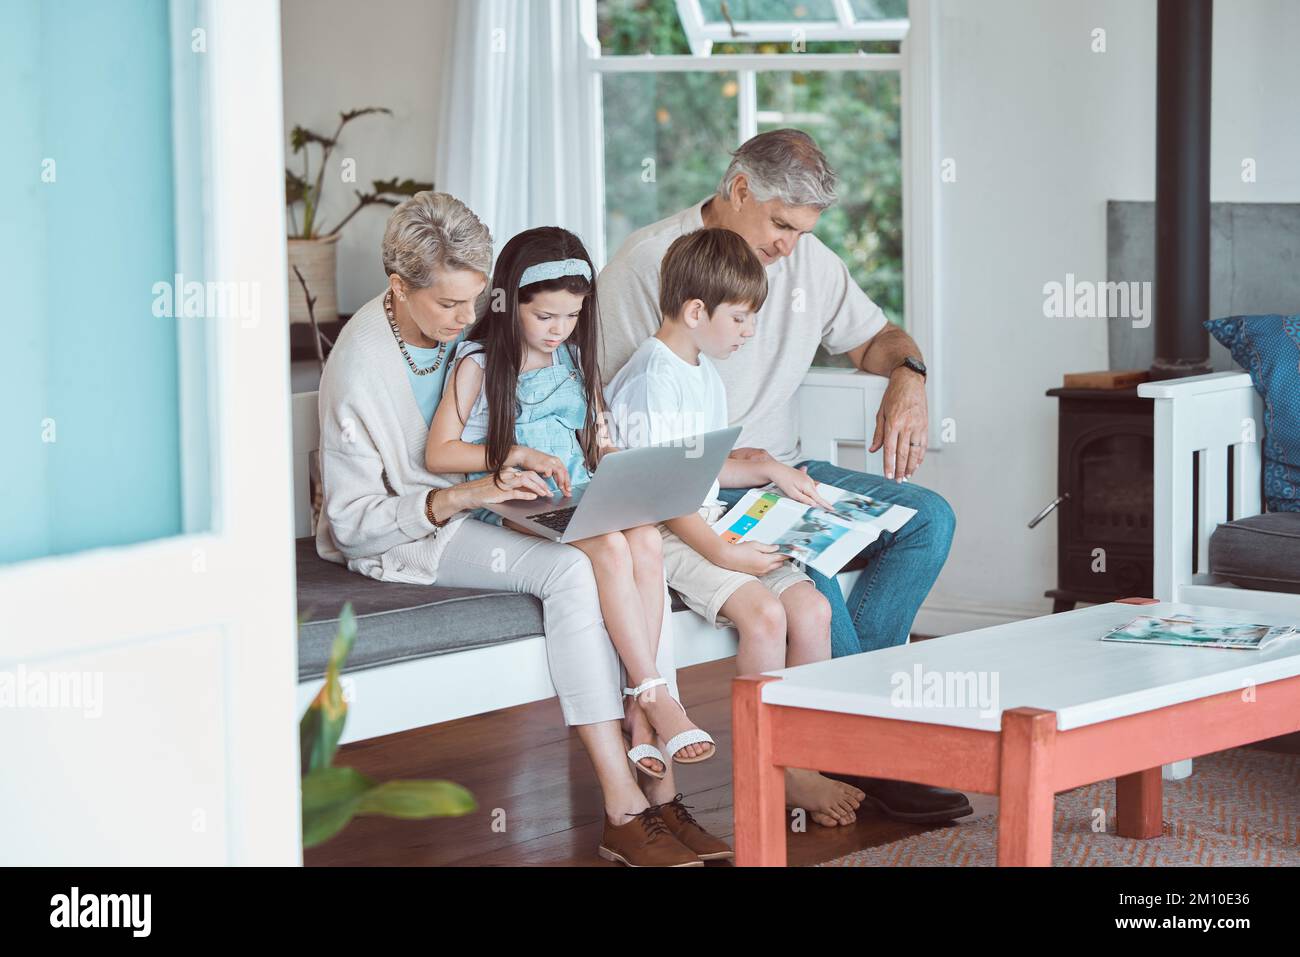 Perfect Sundays spent together. grandparents bonding with their grandkids on the sofa at home. Stock Photo